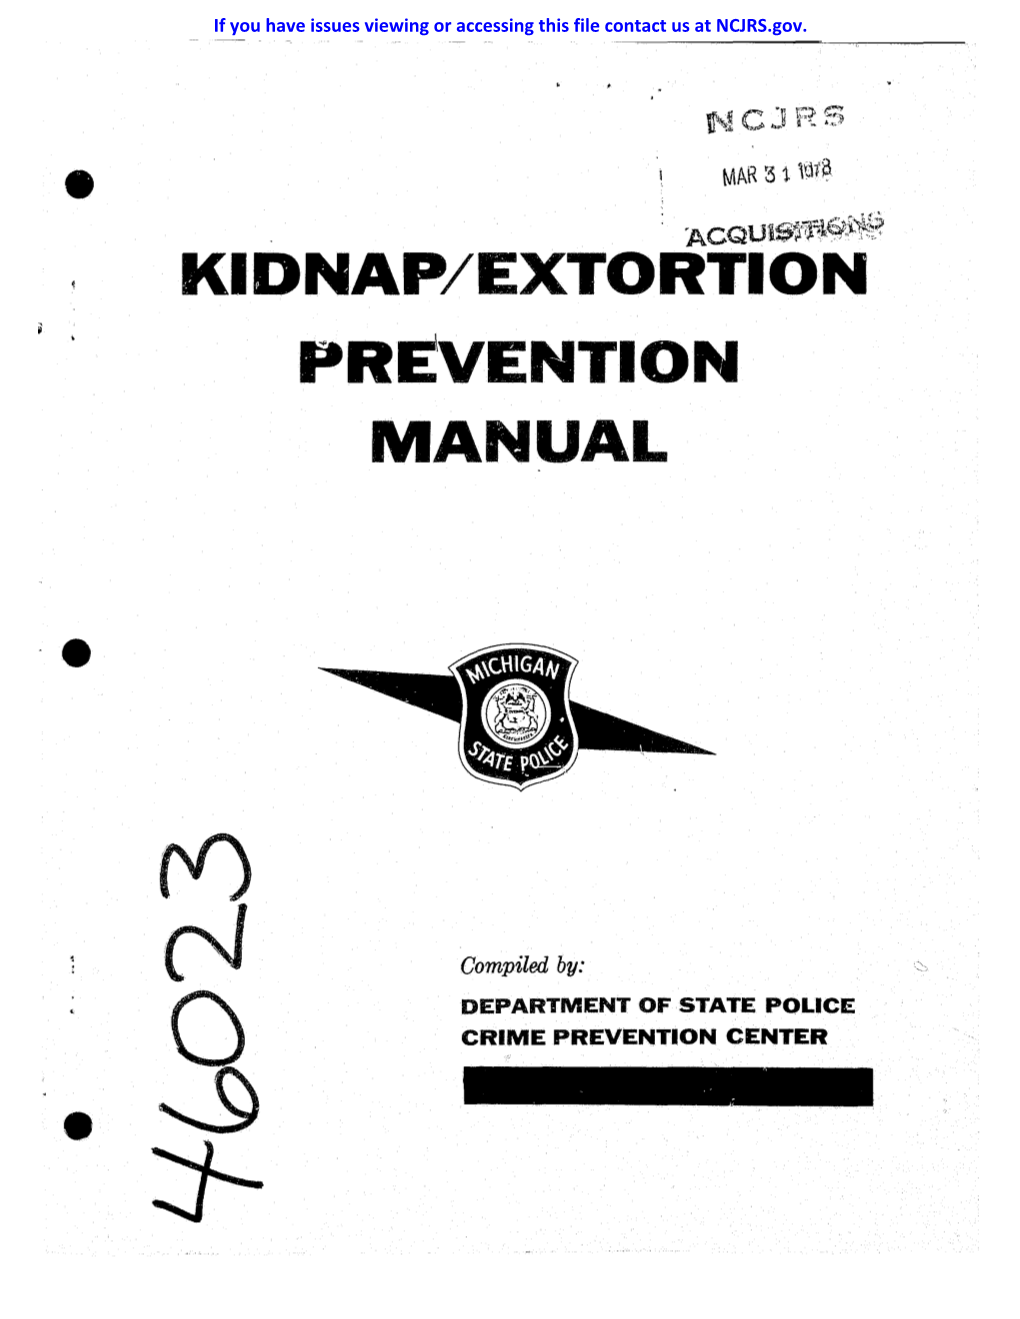 Kidnap/Extortion Prevention Manual